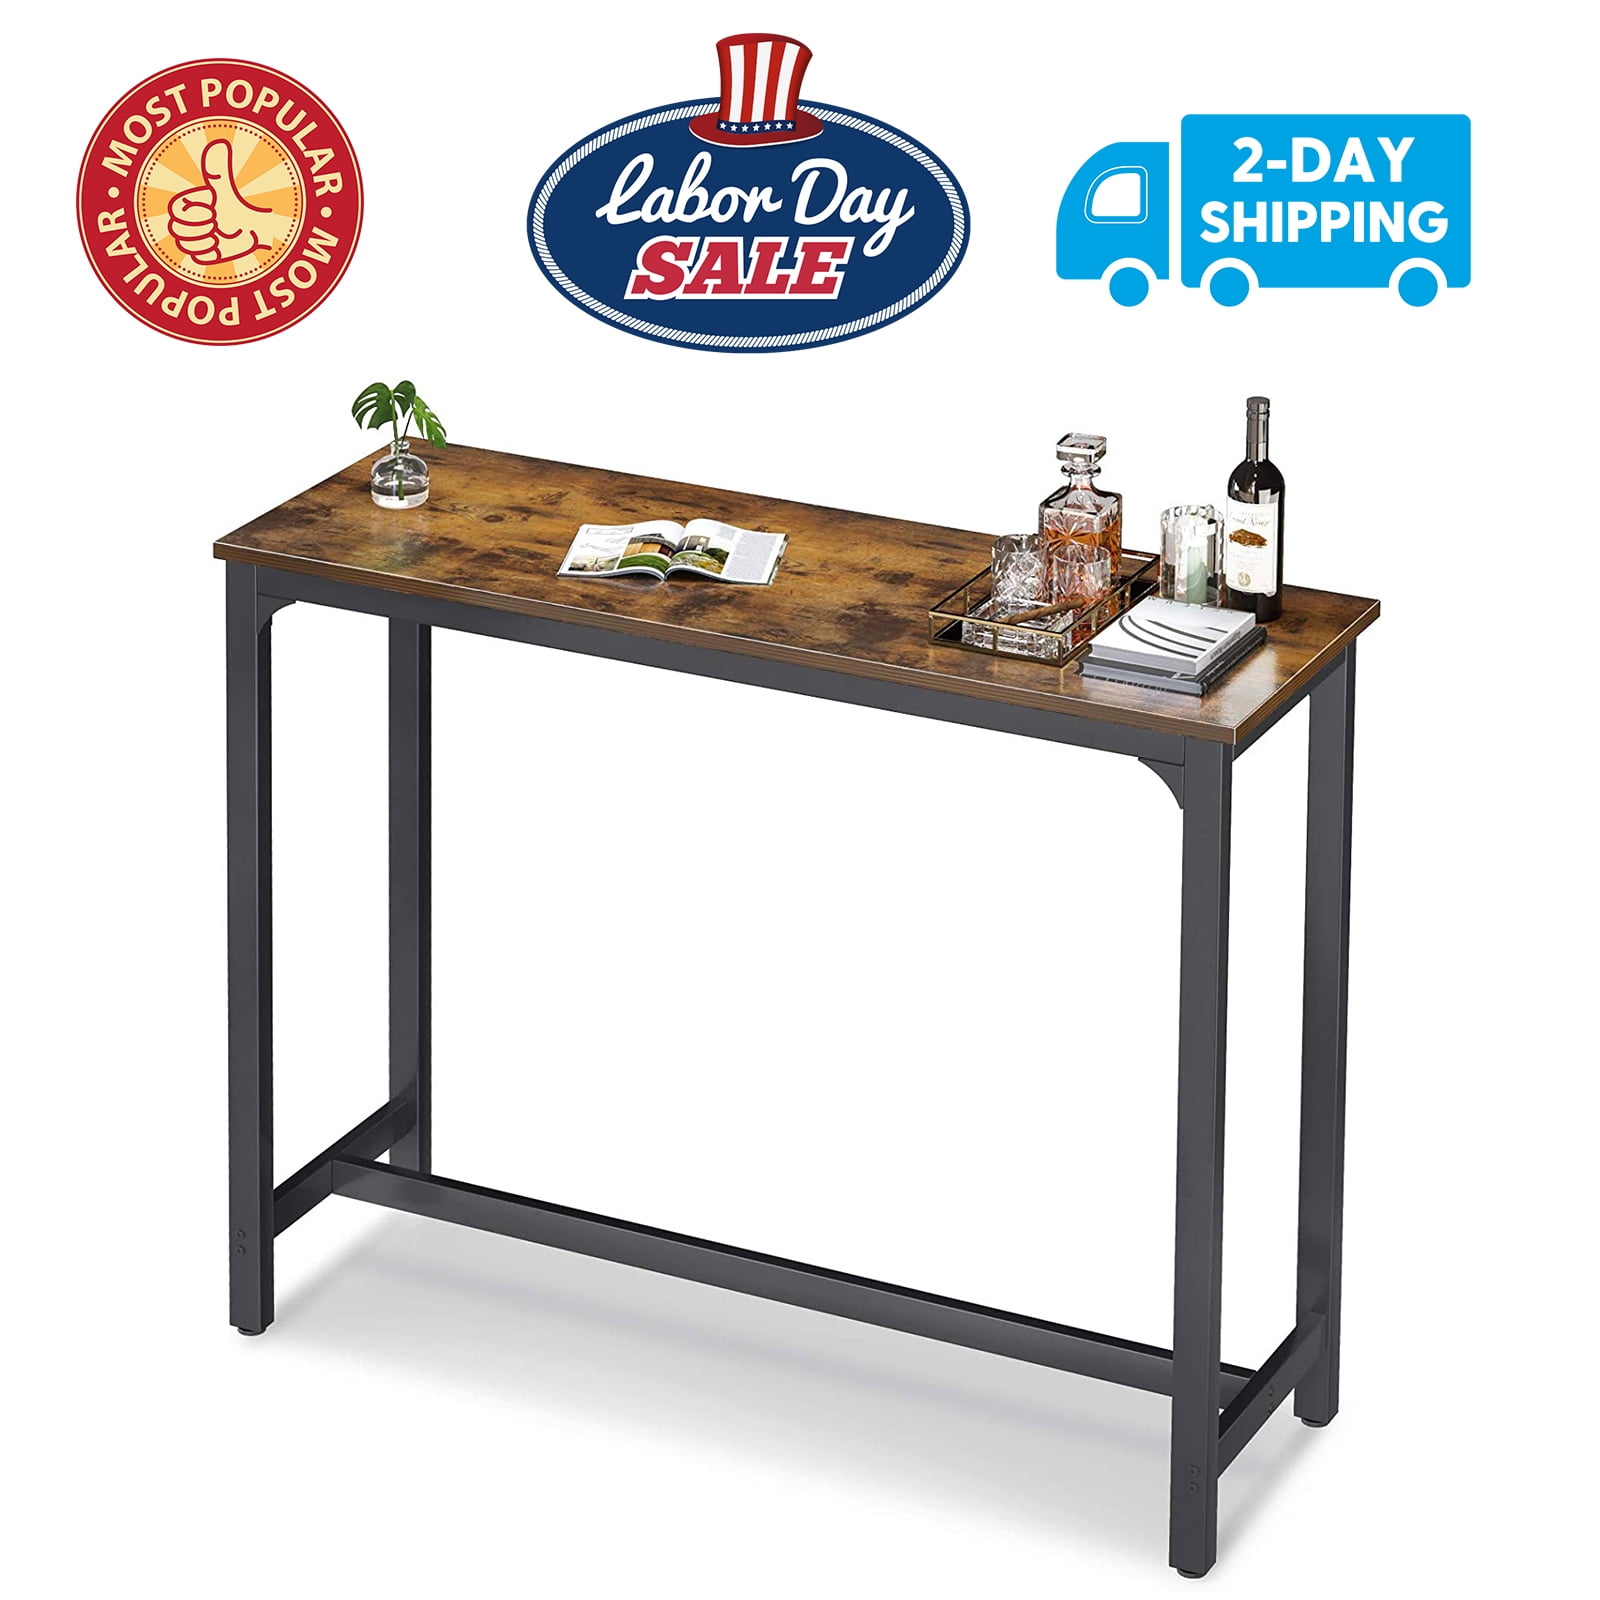 ODK 39 Bar Table Rectangular High Top Kitchen & Dining Tables with Sturdy Legs & Easy-to-Clean Top & 10 Min Quick Assembly Indoor use Bar Height Pub Table Black 